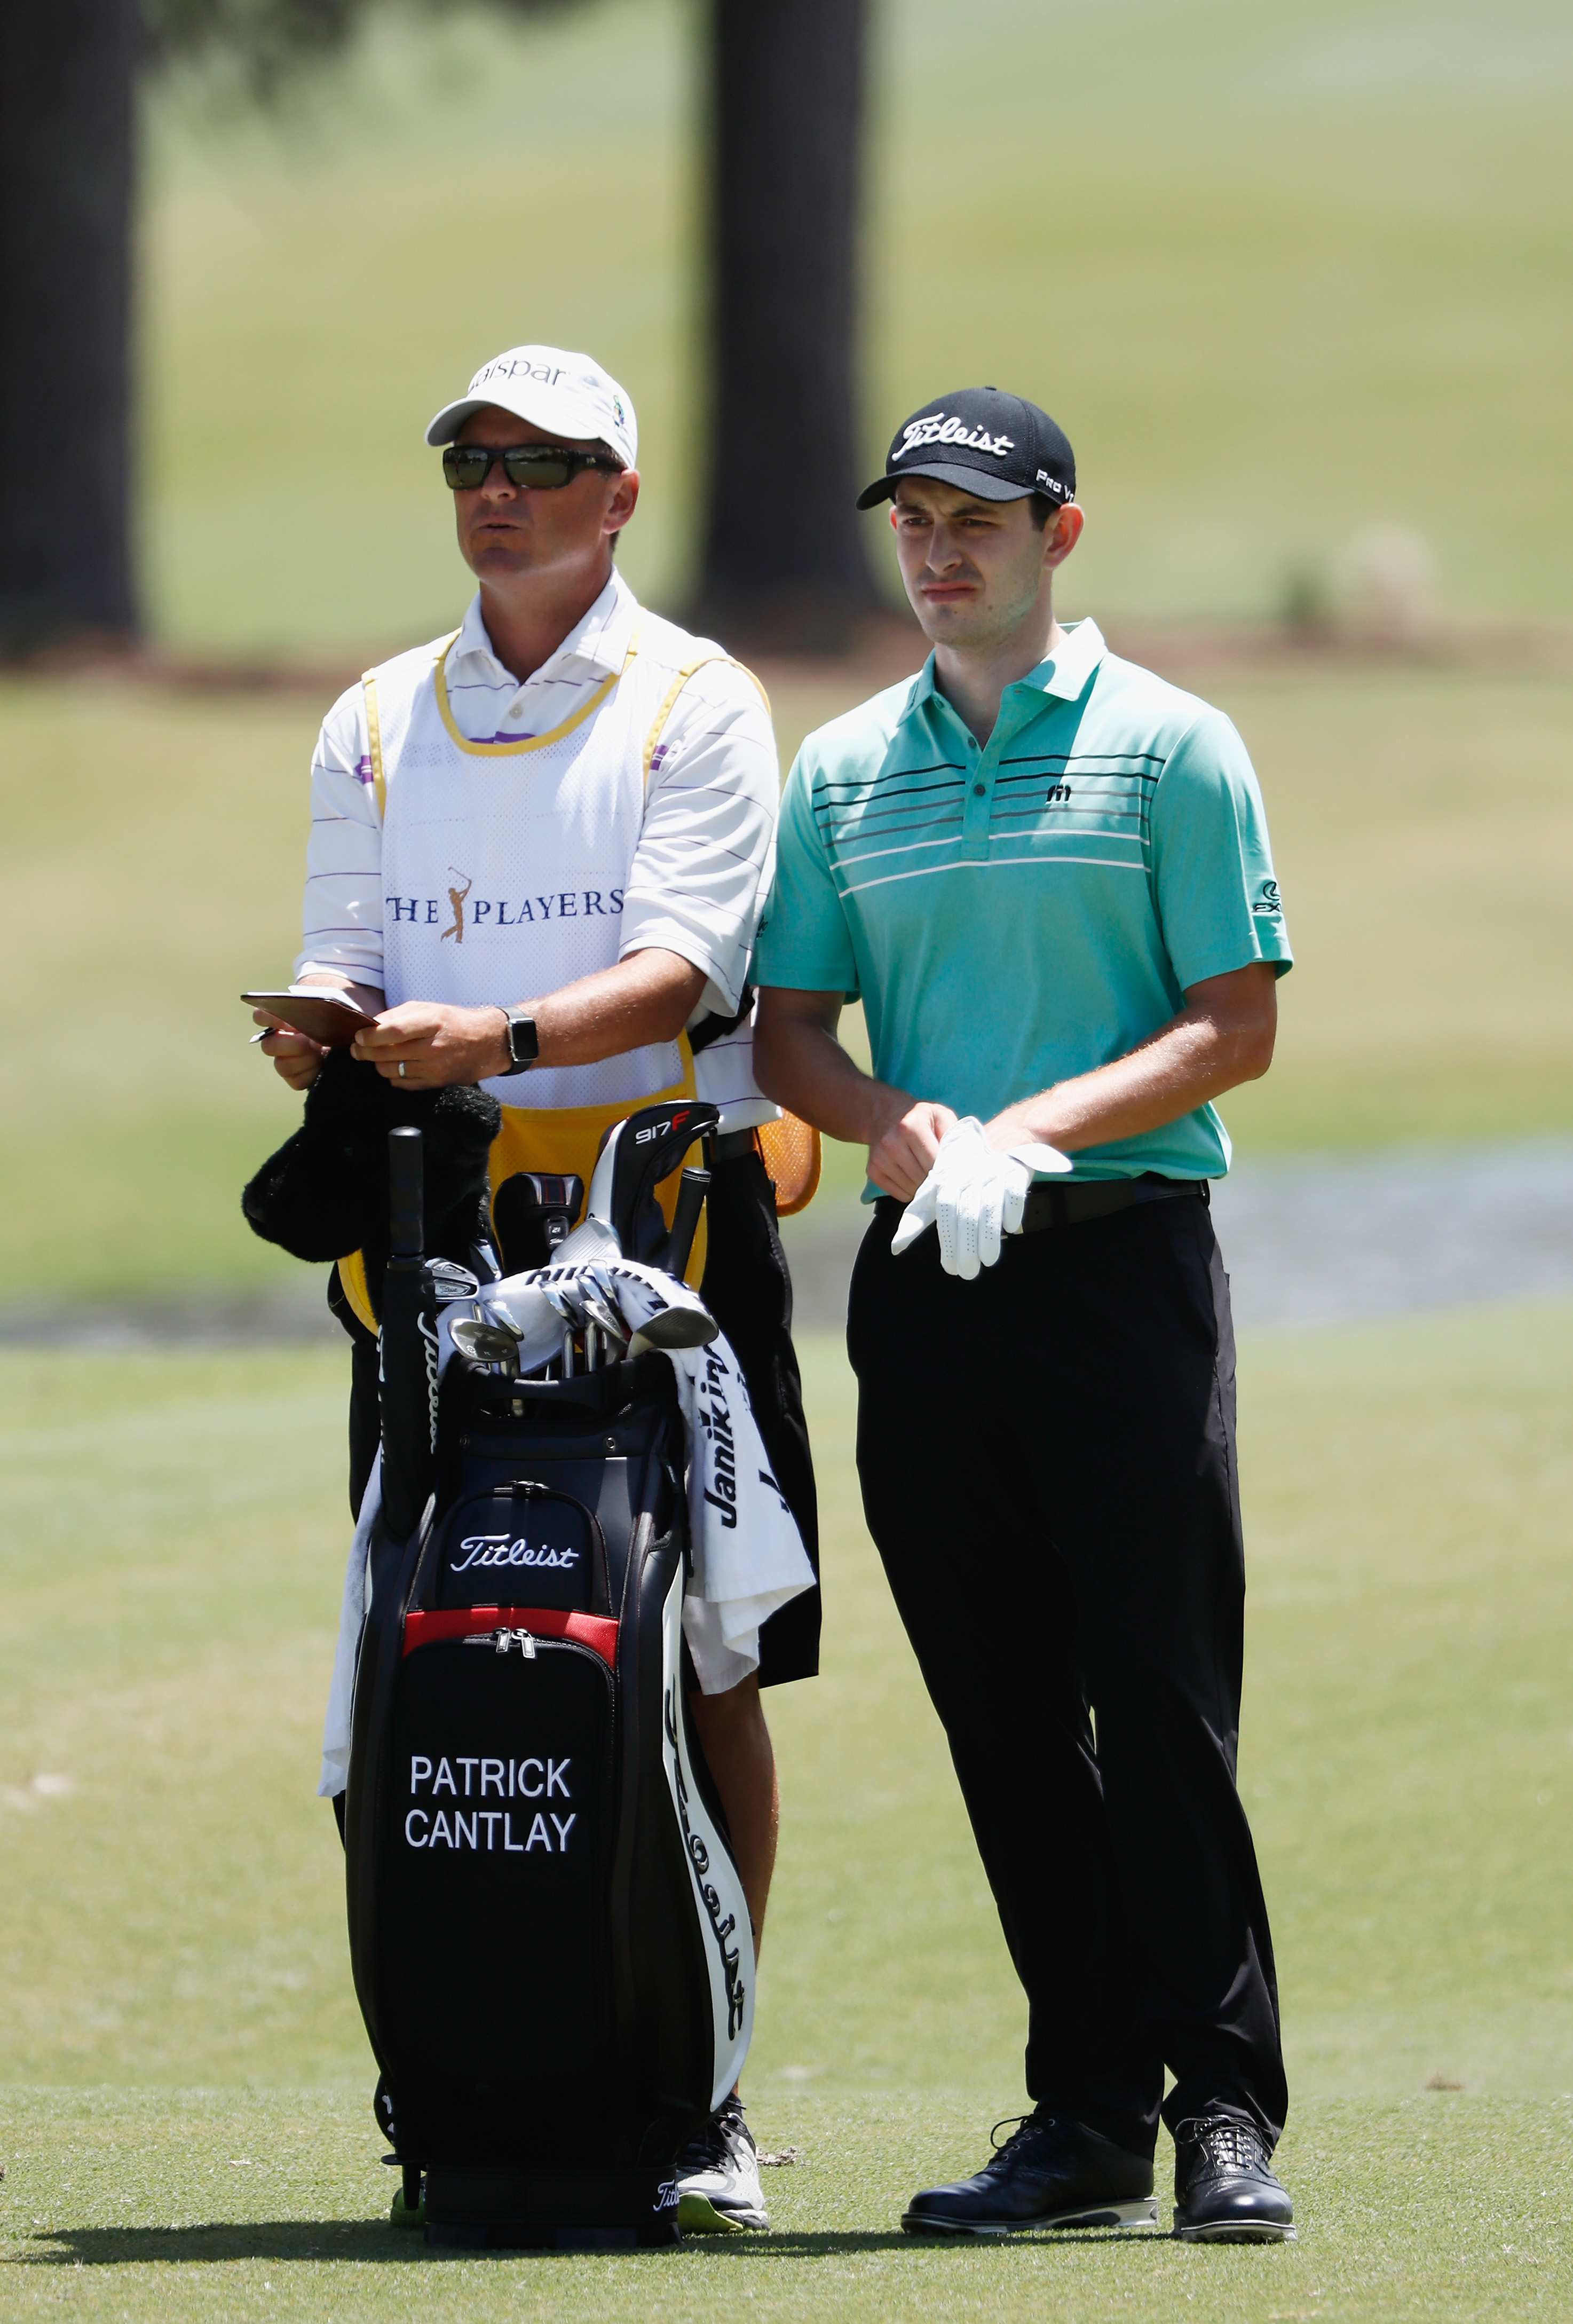 Patrick Cantlay's Caddie Matt Minister 5 Fast Facts